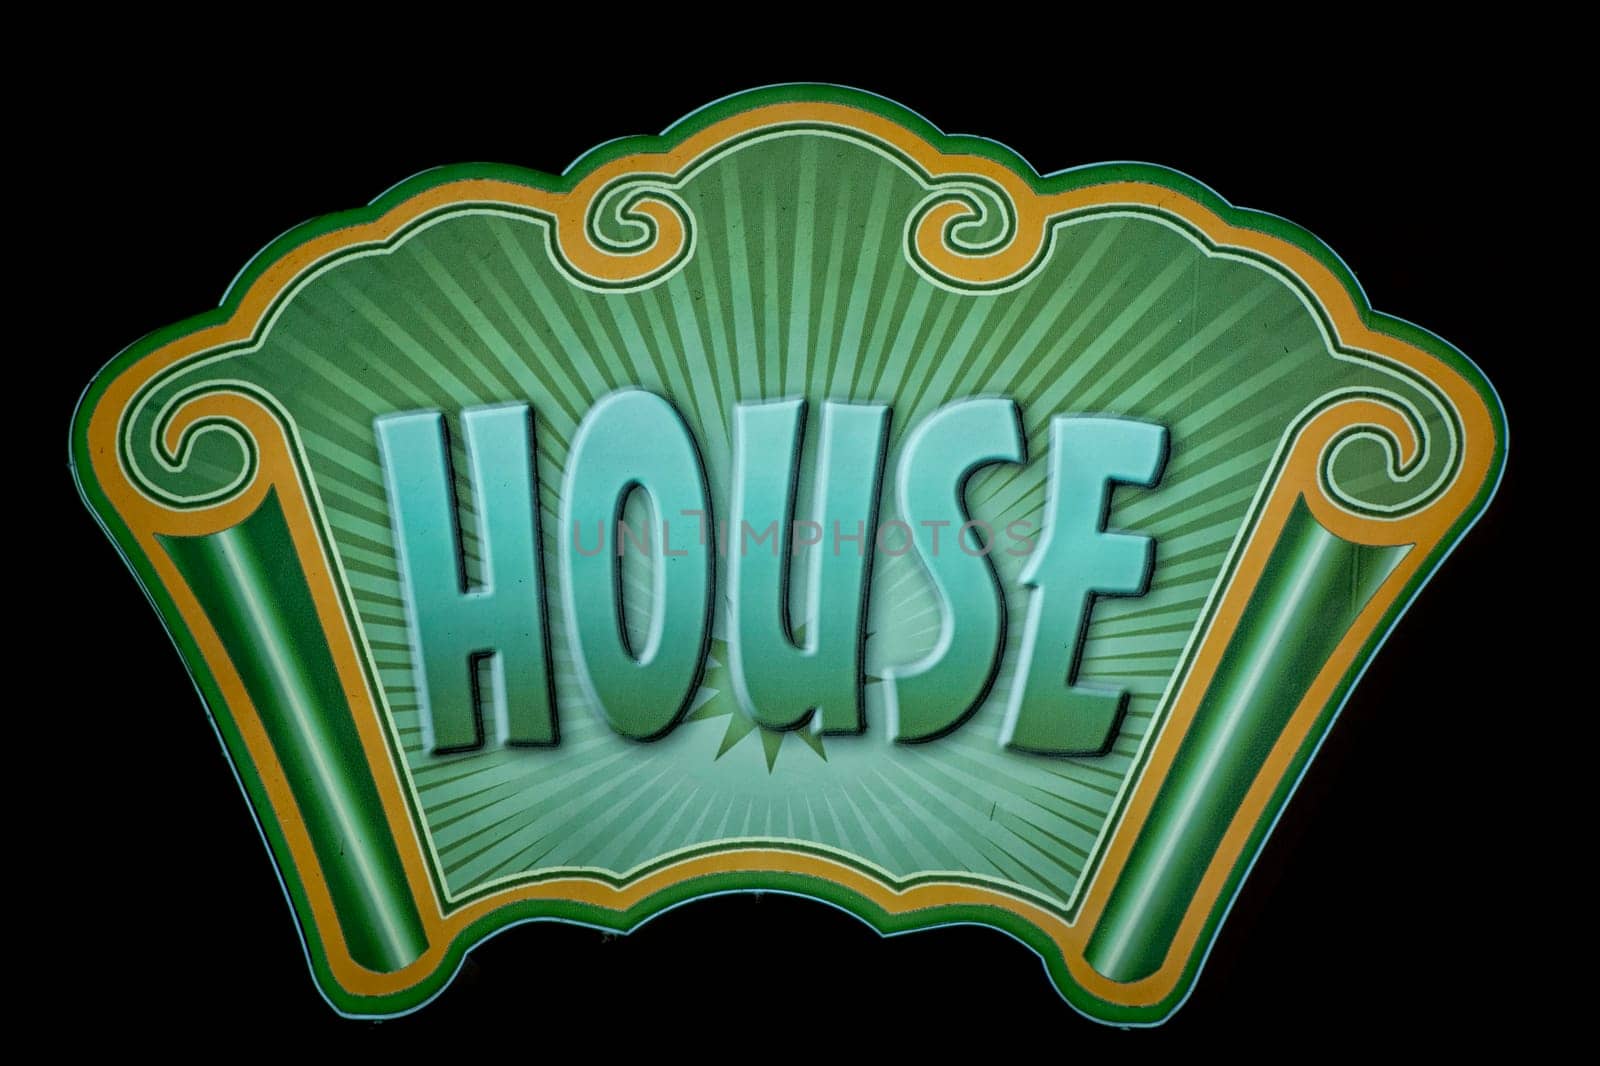 house glowing sign on black background